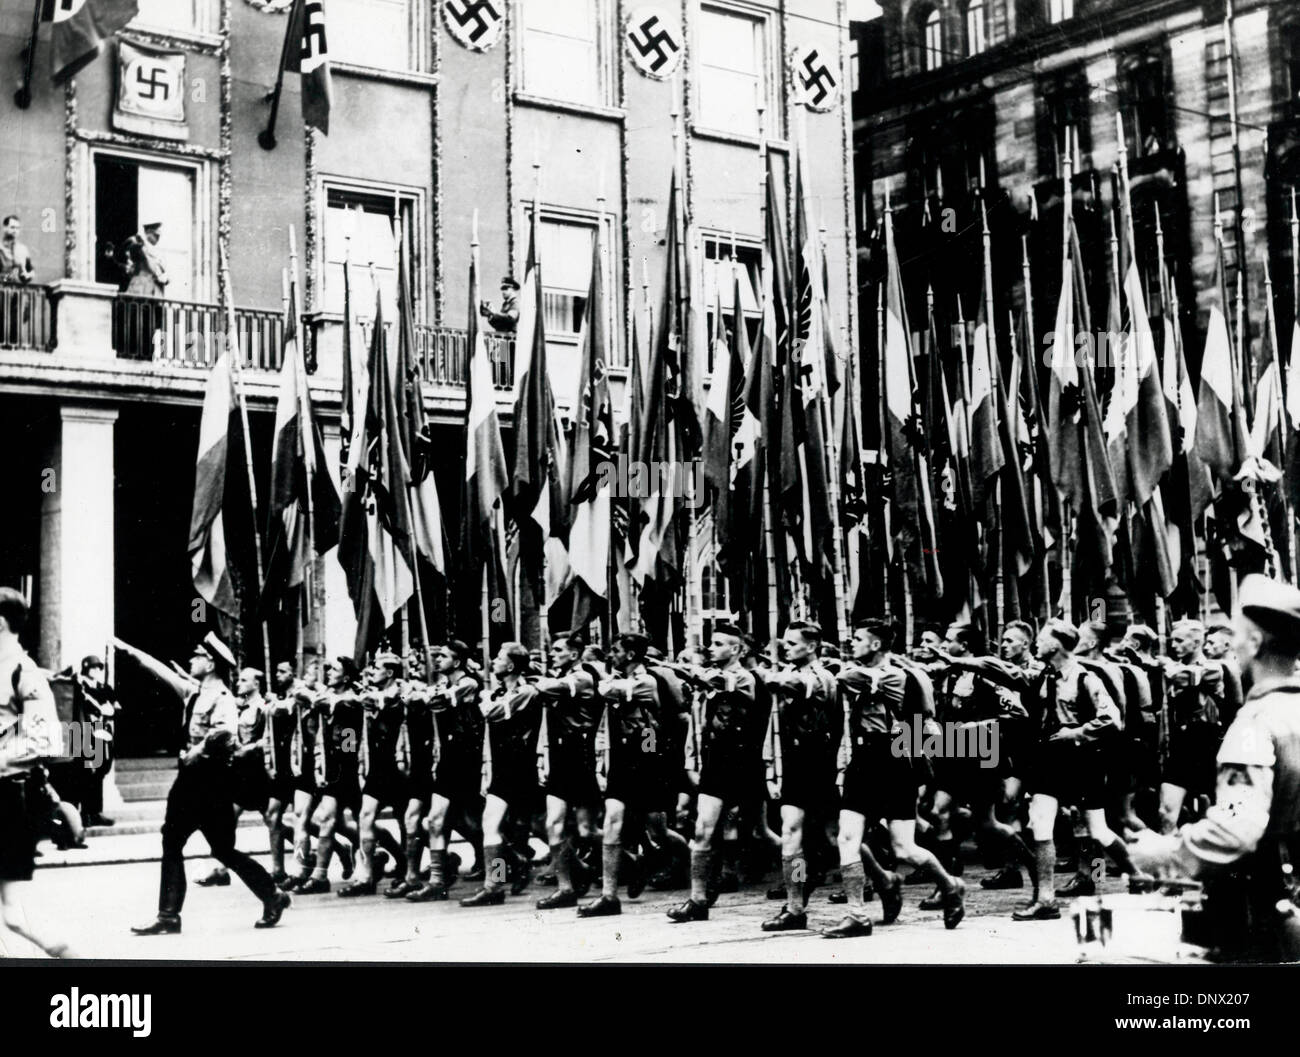 Jan. 25, 1938 - Nuremberg, Germany - German Youth march through the streets at a Nazi congress in Nuremberg. (Credit Image: © KEYSTONE Pictures USA/ZUMAPRESS.com) Stock Photo